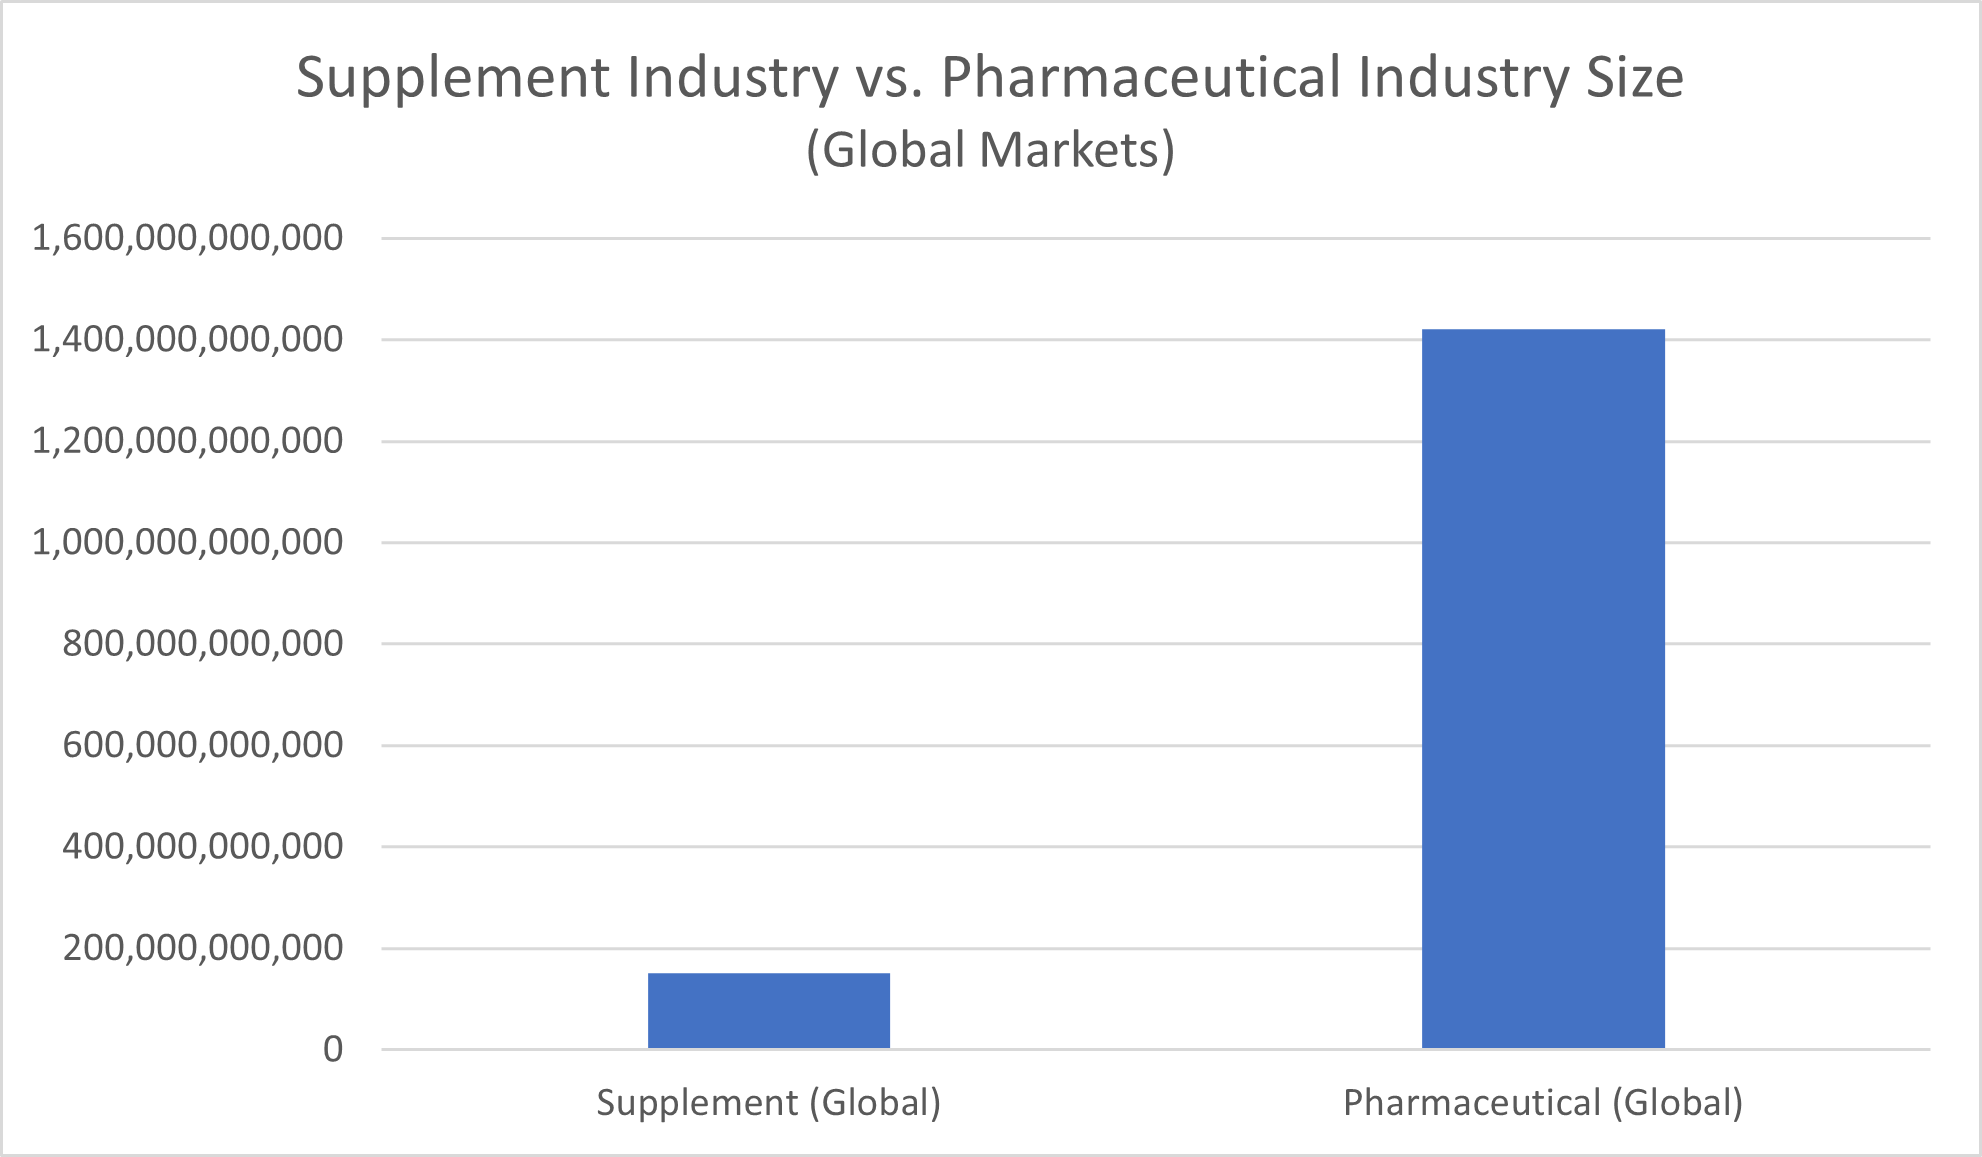 Supplement industry vs. pharmaceutical industry size - global markets